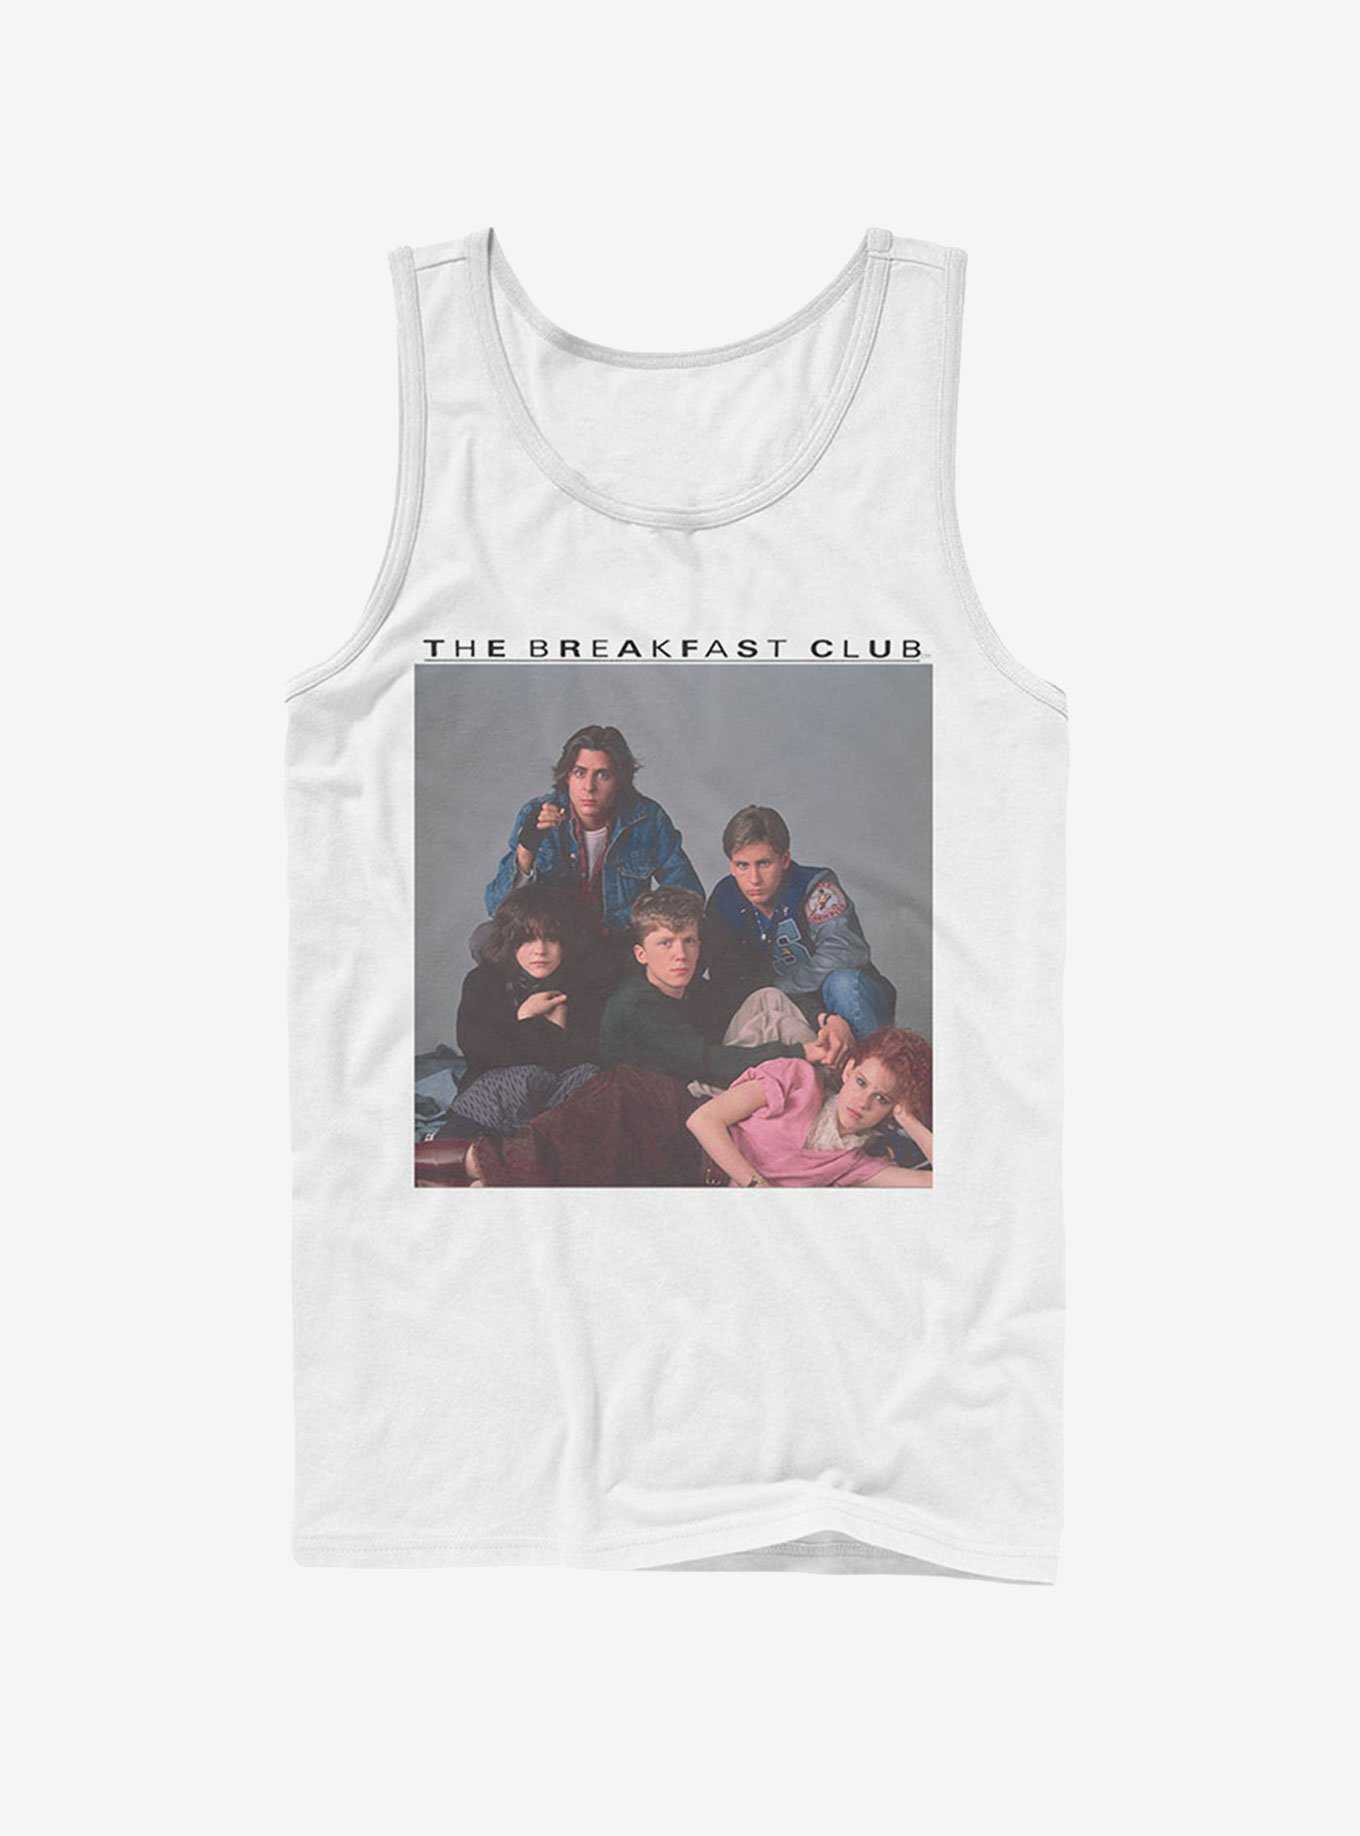 The Breakfast Club Detention Group Pose Tank Top, , hi-res